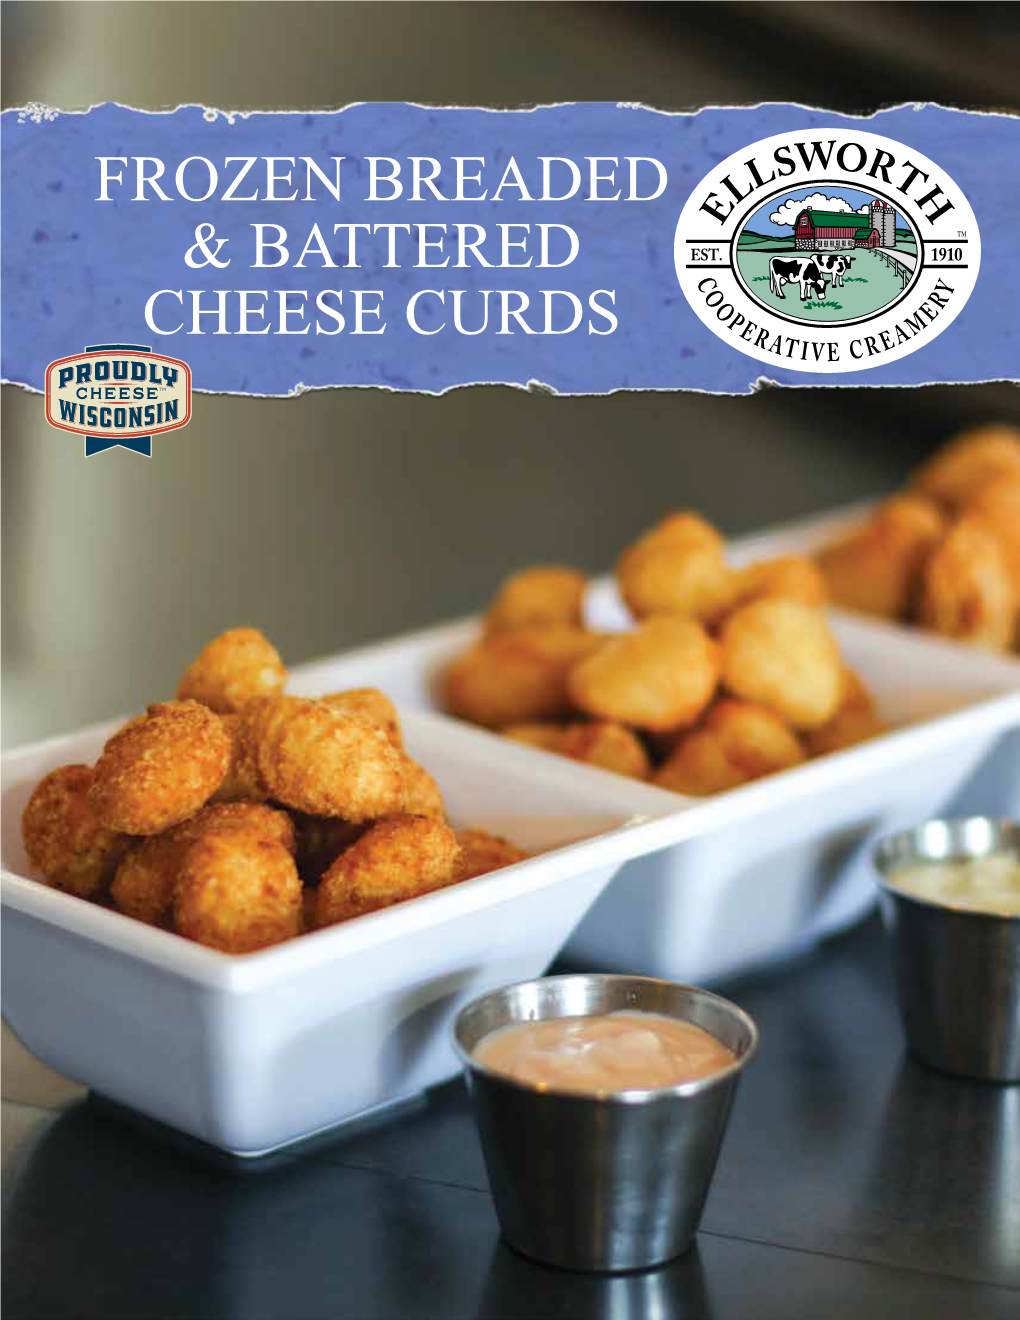 Frozen Breaded & Battered Cheese Curds